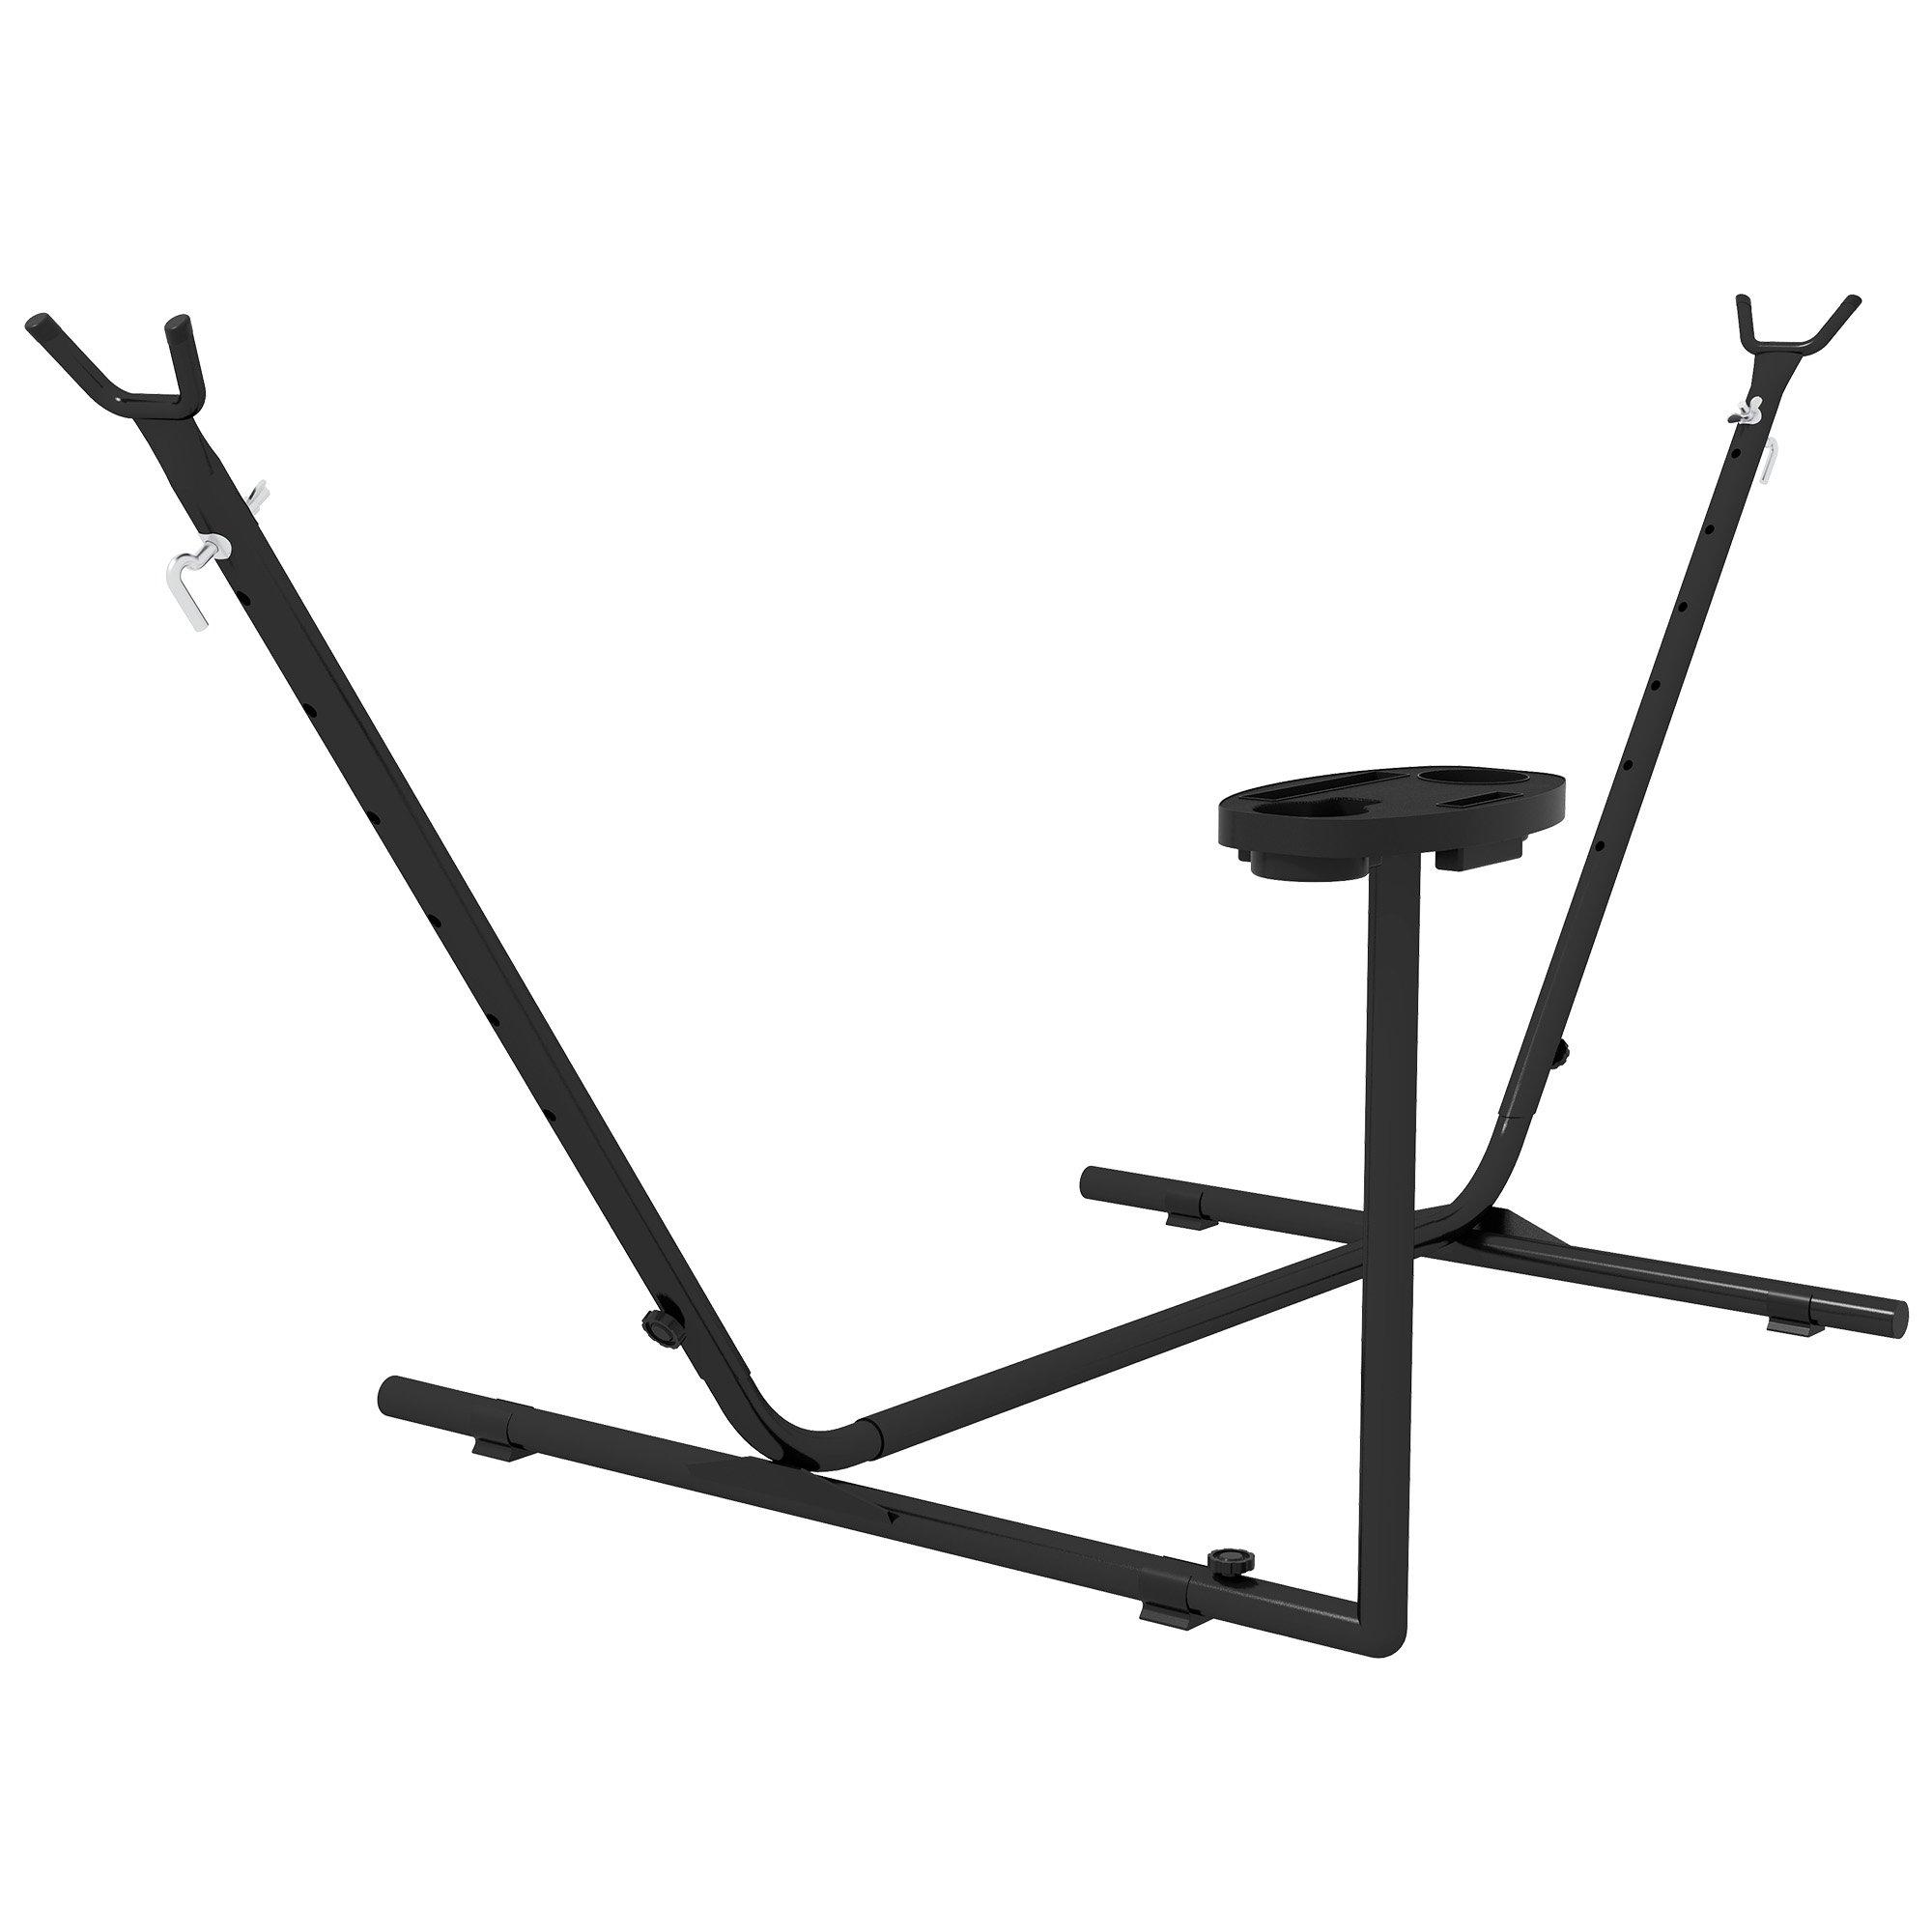 Hammock Stand with Side Tray, Hammock Net Stand with Steel Frame, Black